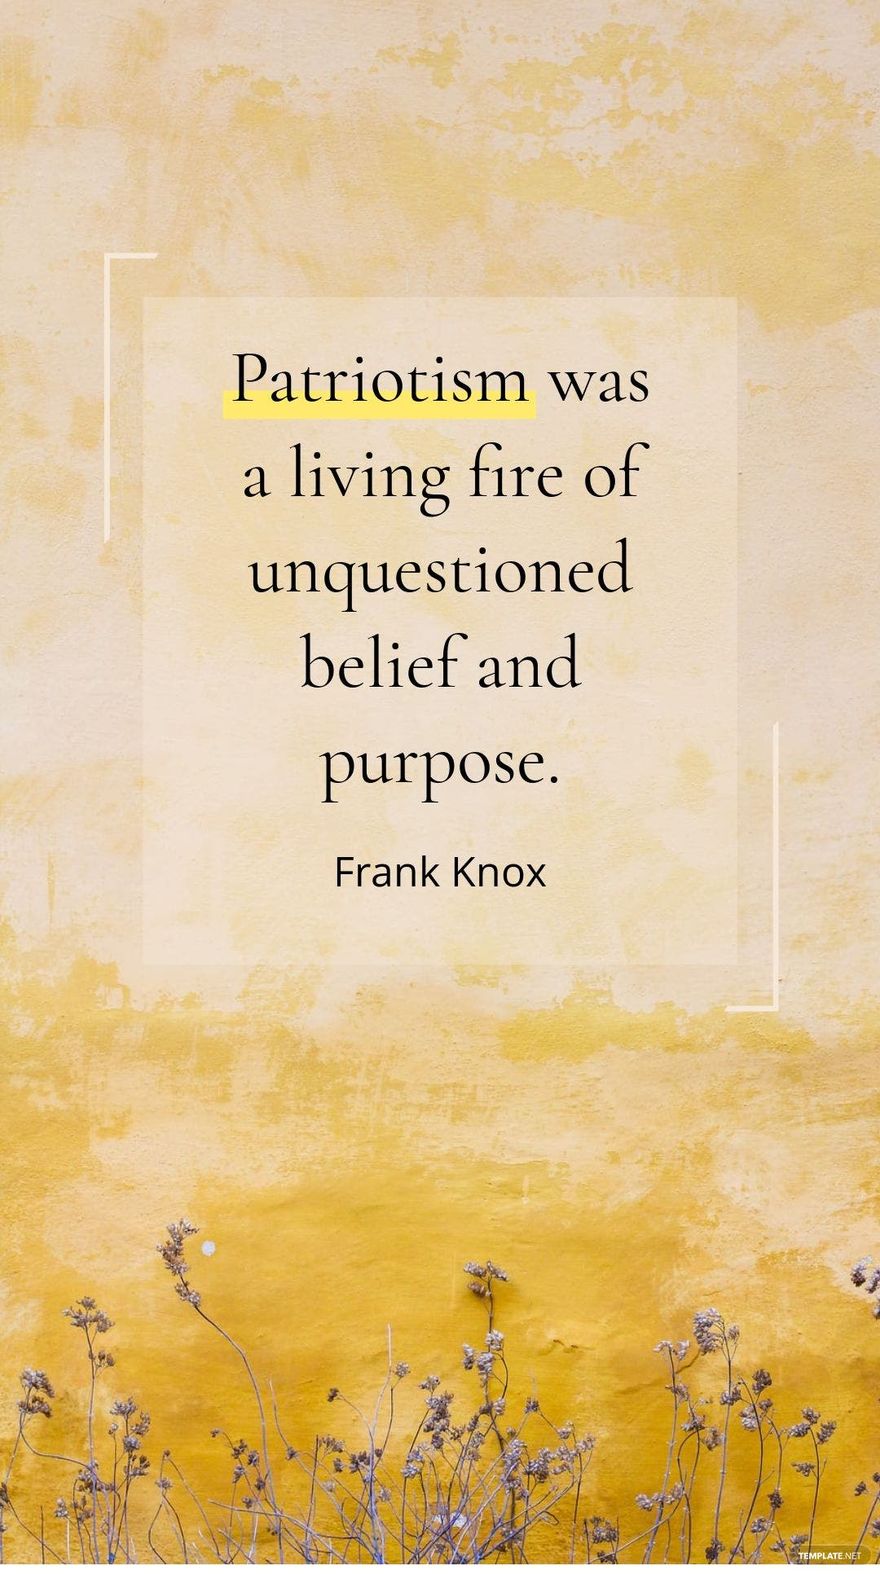 Free Frank Knox - Patriotism was a living fire of unquestioned belief and purpose. 